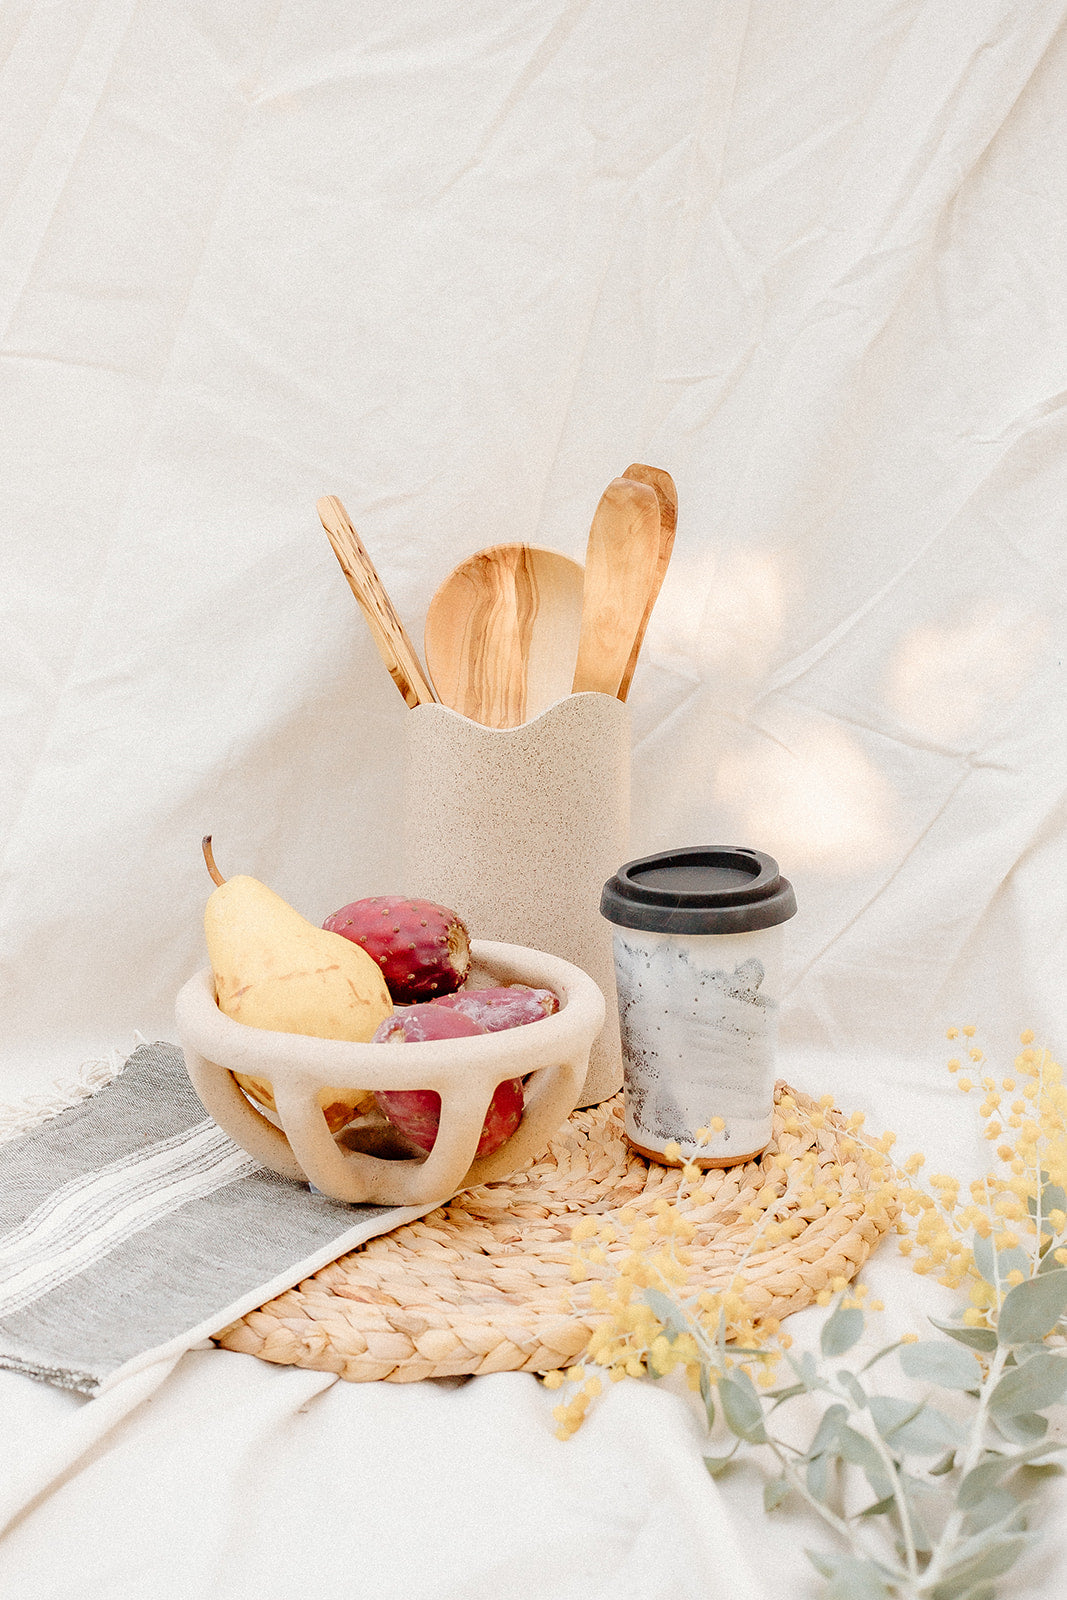 The Swell Utensil Holder makes itself at home in any and every kitchen. Designed to match the countertop and backsplash of your choice, the Swell is the ideal place for your favorite utensils. Handmade in Brooklyn, NY.